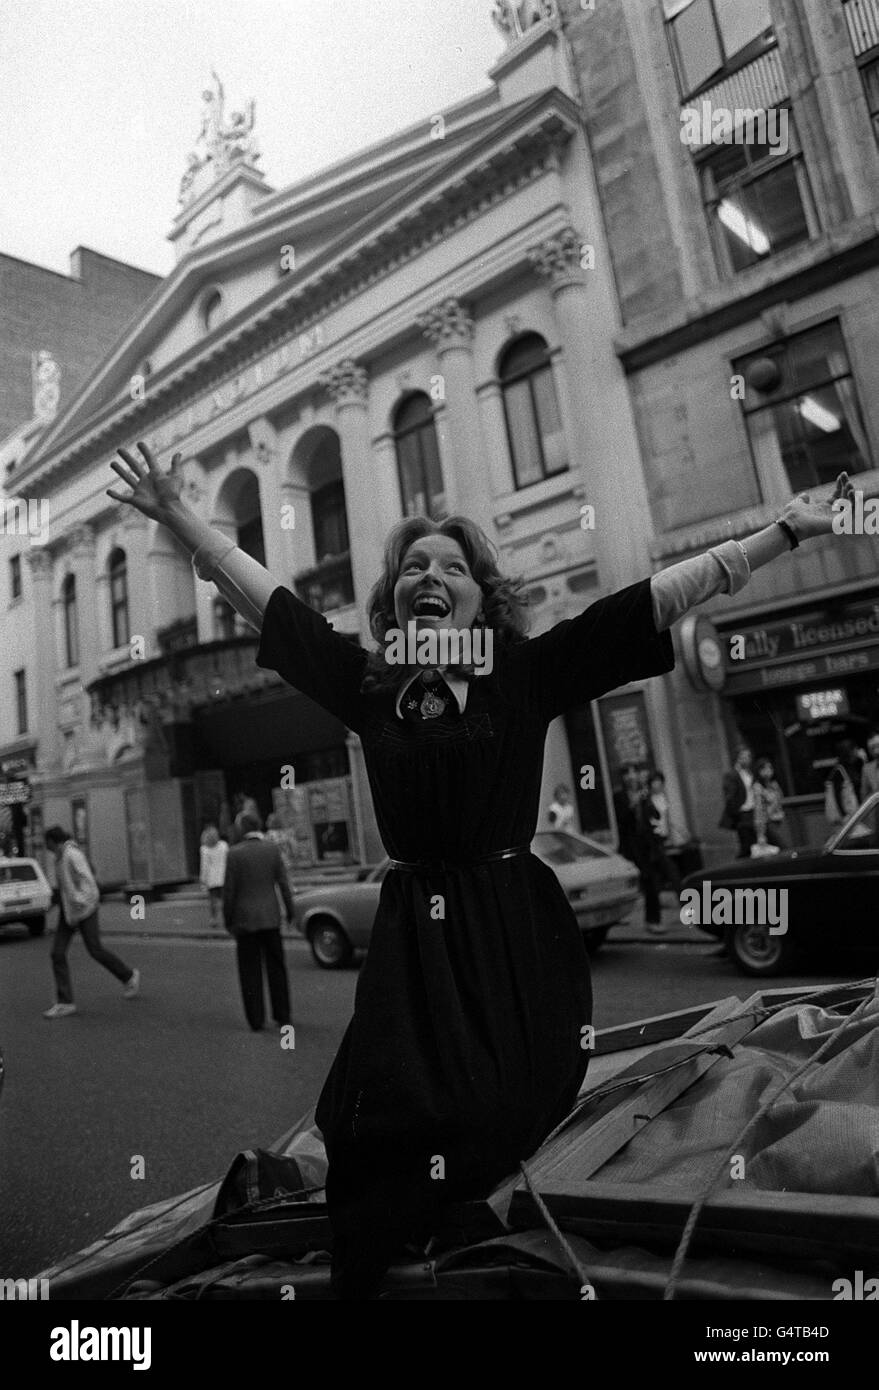 Lena Zavaroni outside the London Palladium, where she is performing with husband and wife team, Dukes and Lee. Lena is the youngest artiste to ever top the bill at the Palladium. *7/11/1982 : Lena Zavaroni is admitted to the London Psychiatric All Saints Hospital in Kennington as a patient. *2/10/1999 : Lena Zavaroni dies from an infection following an operation. Miss Zavaroni had suffered from aneroxia nervosa for many years. Stock Photo